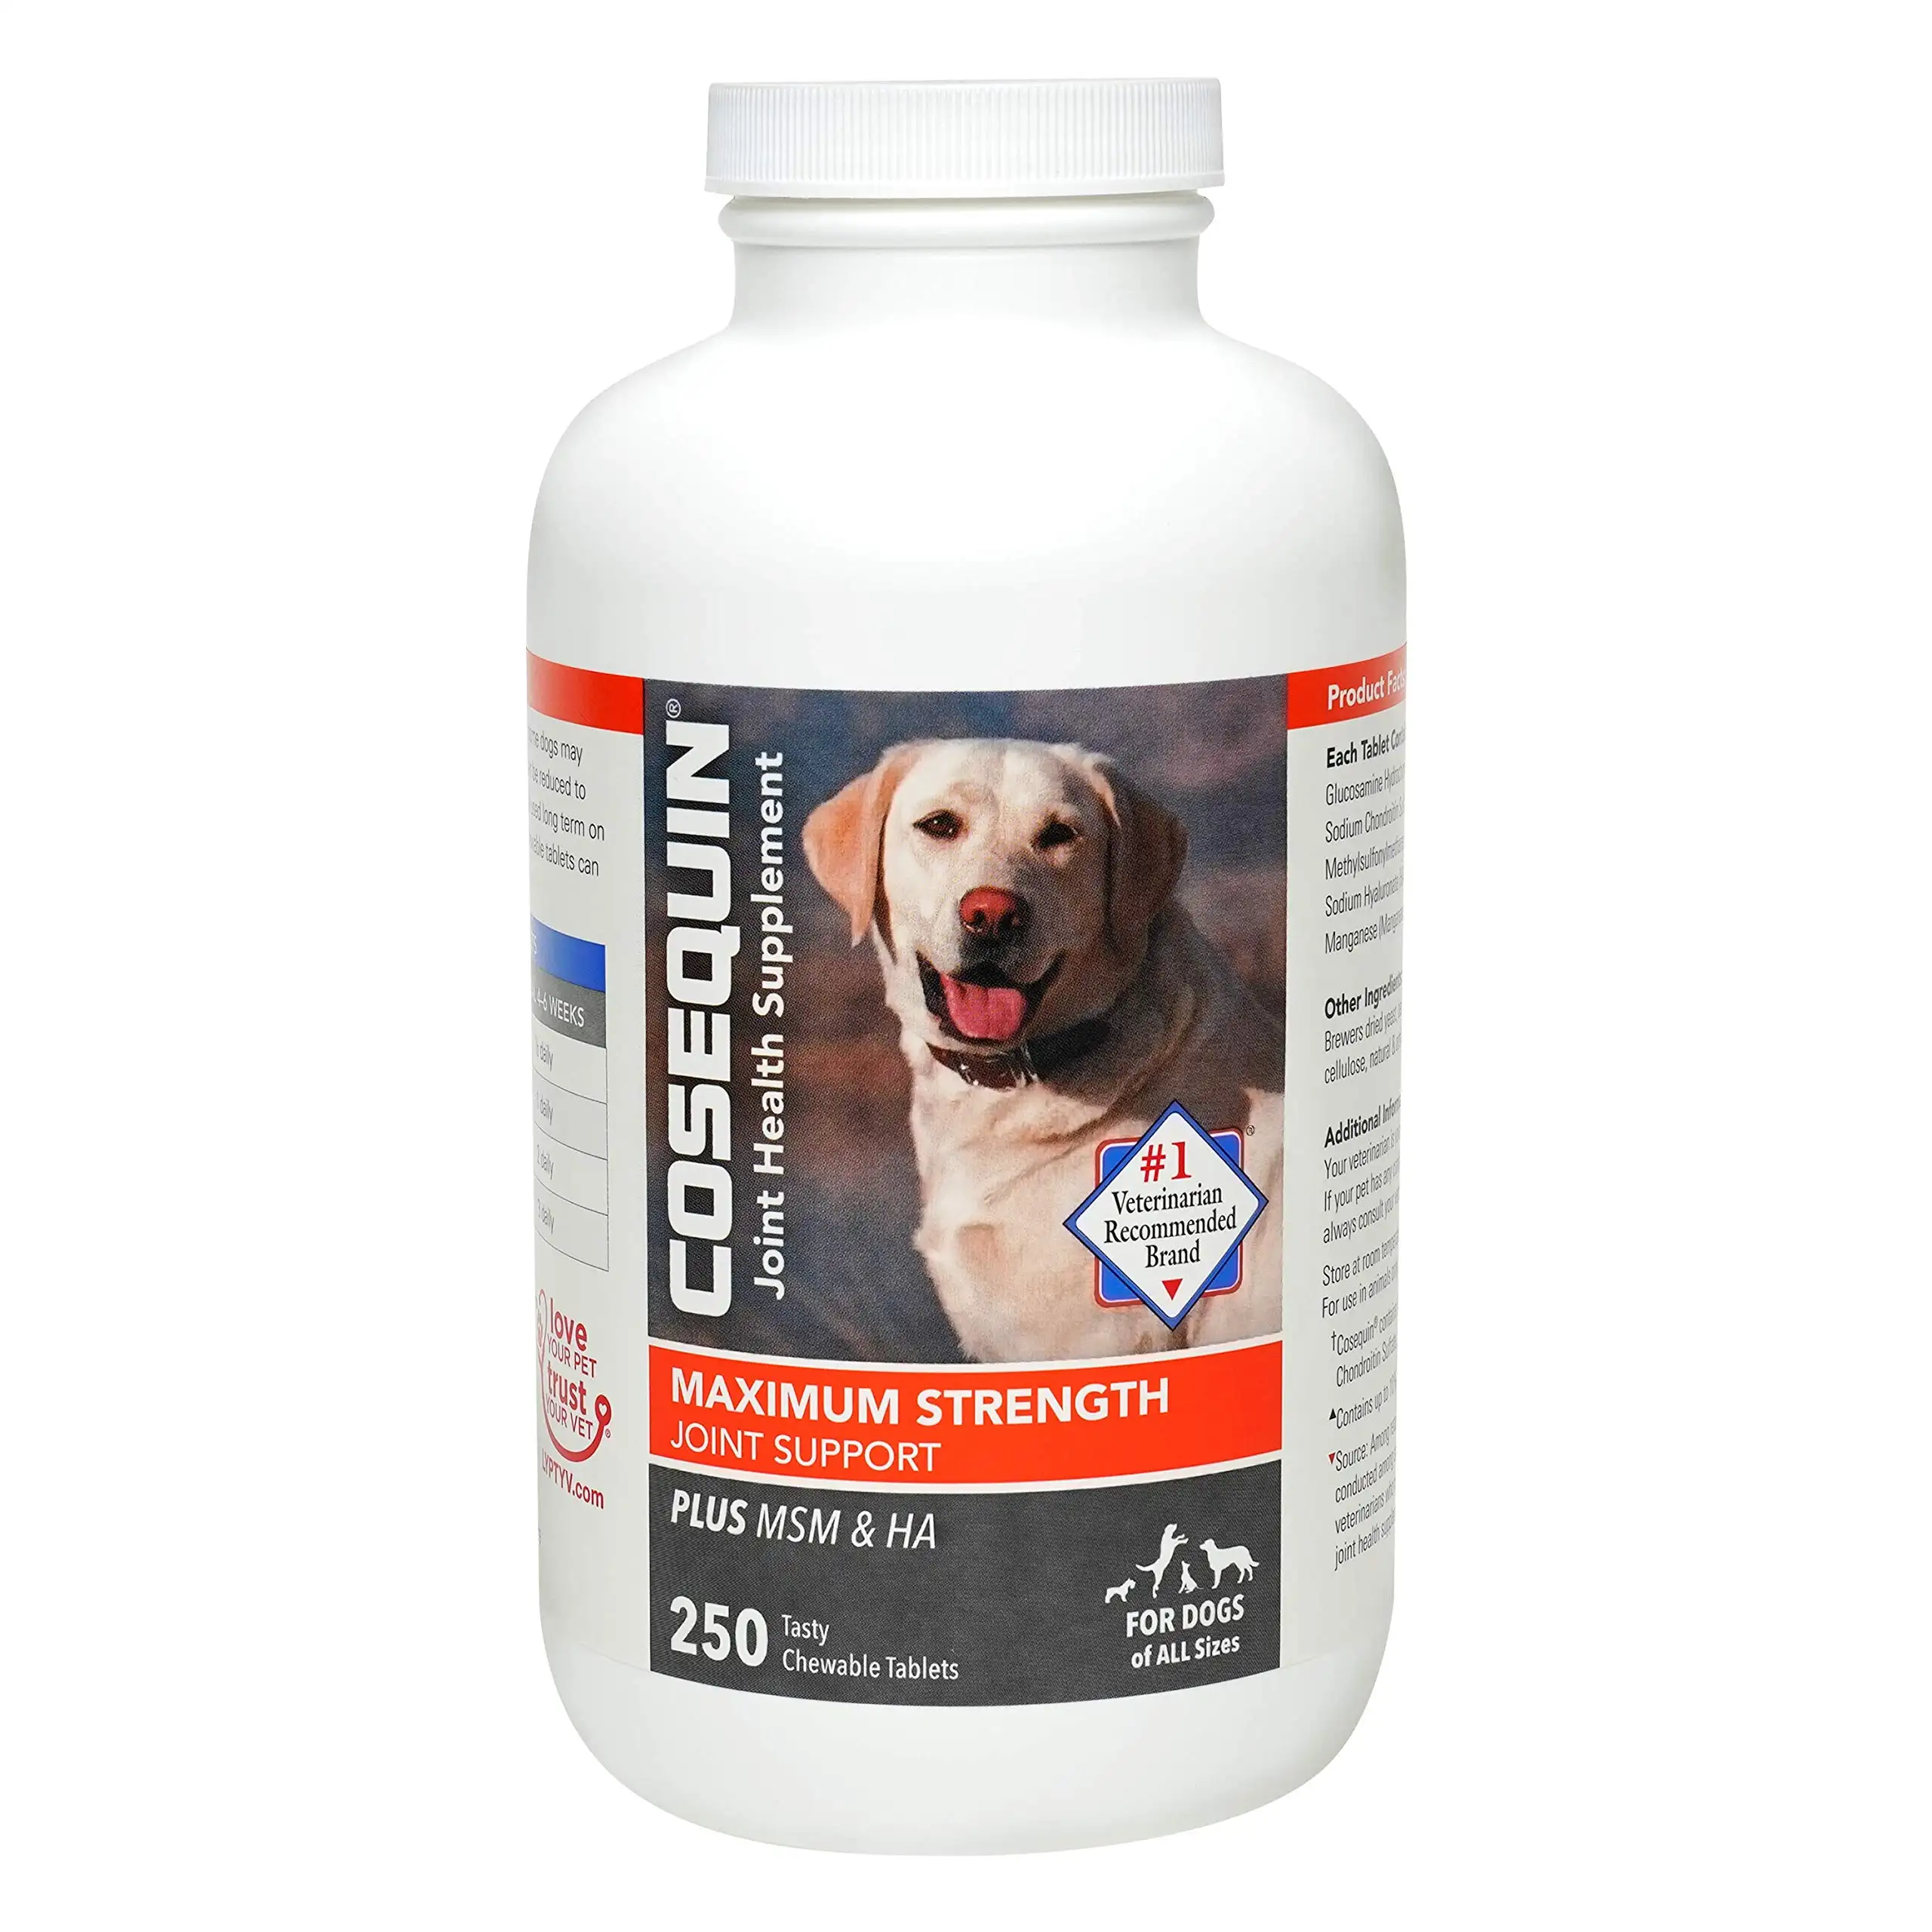 Maximum Strength Joint Health Supplement for Dogs - With Glucosamine, Chondroitin, and MSM, 250 Chewable Tablets